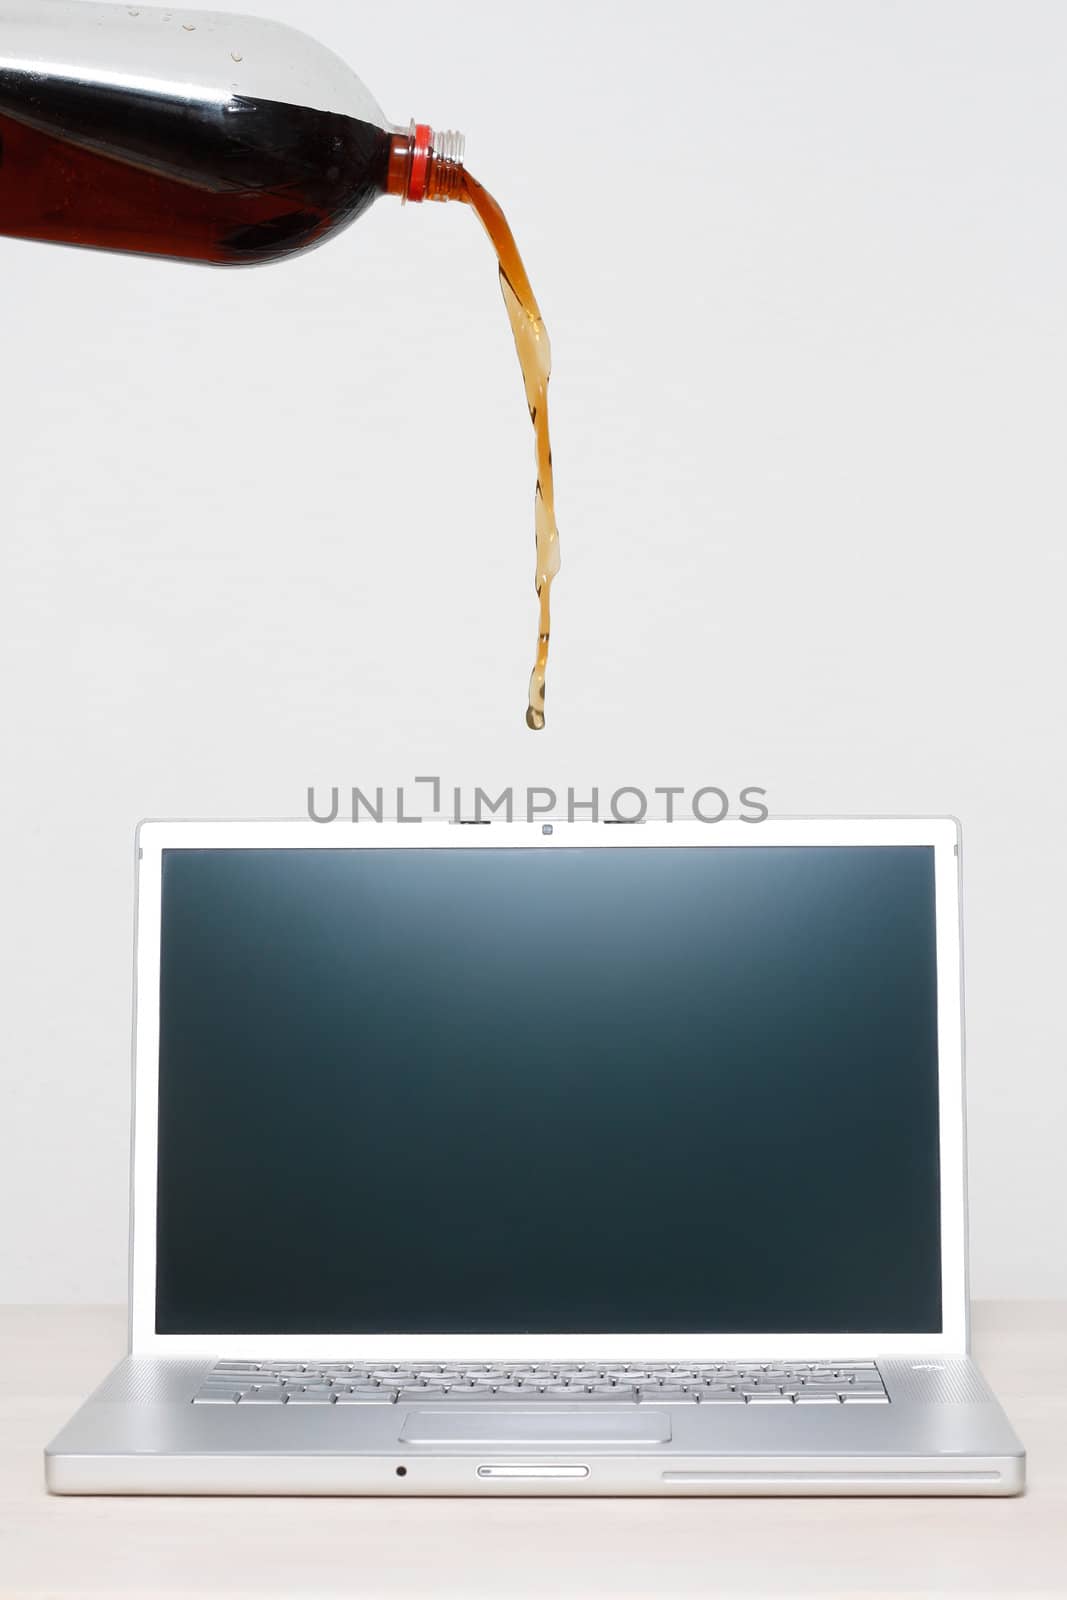 Pouring cola on a laptop by leeser